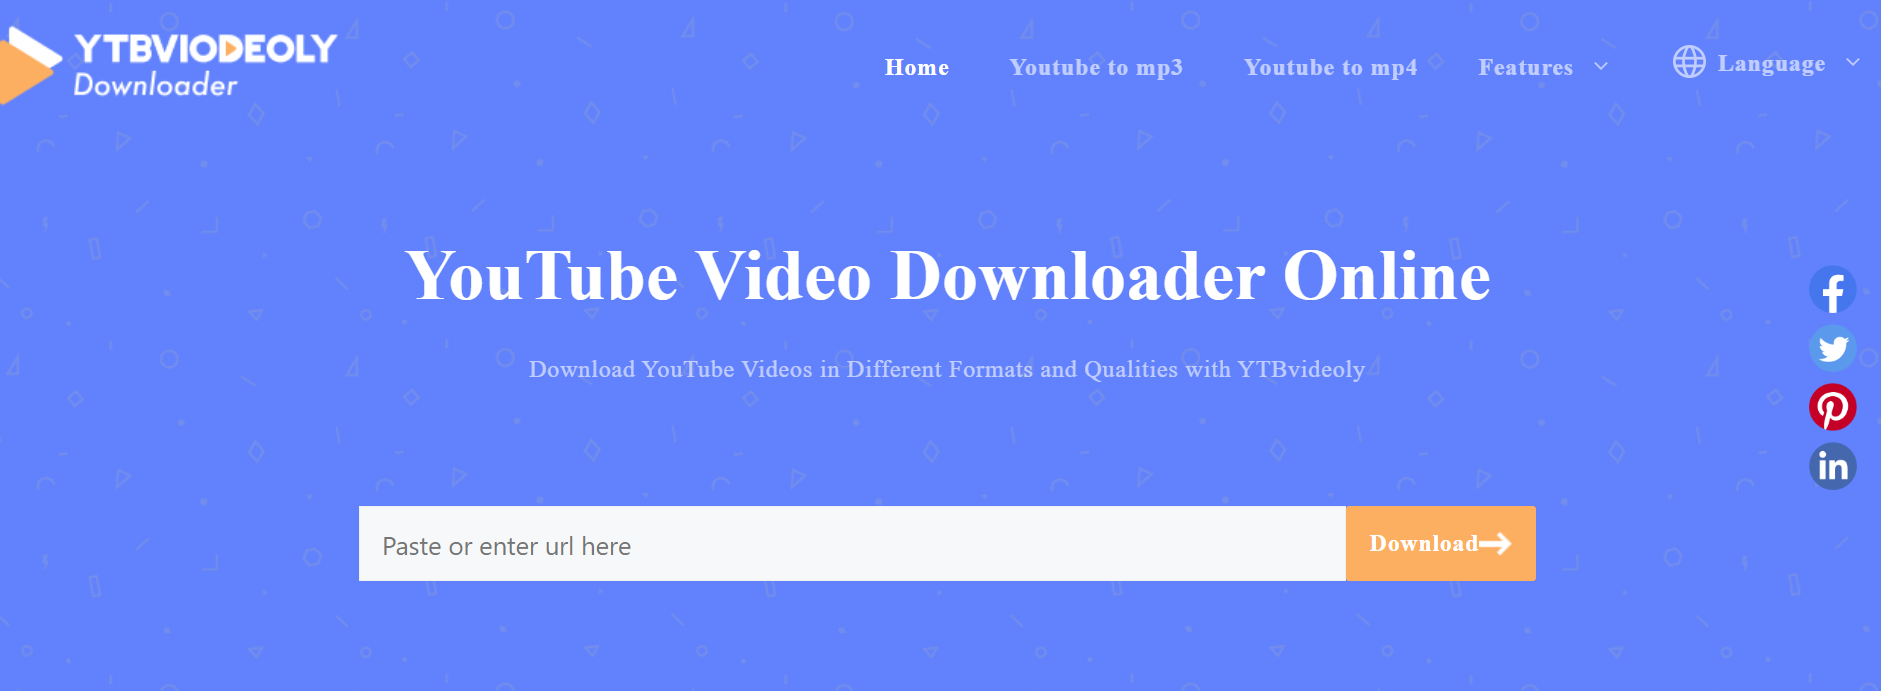 YTBvideoly: The best Youtube video downloader online for free